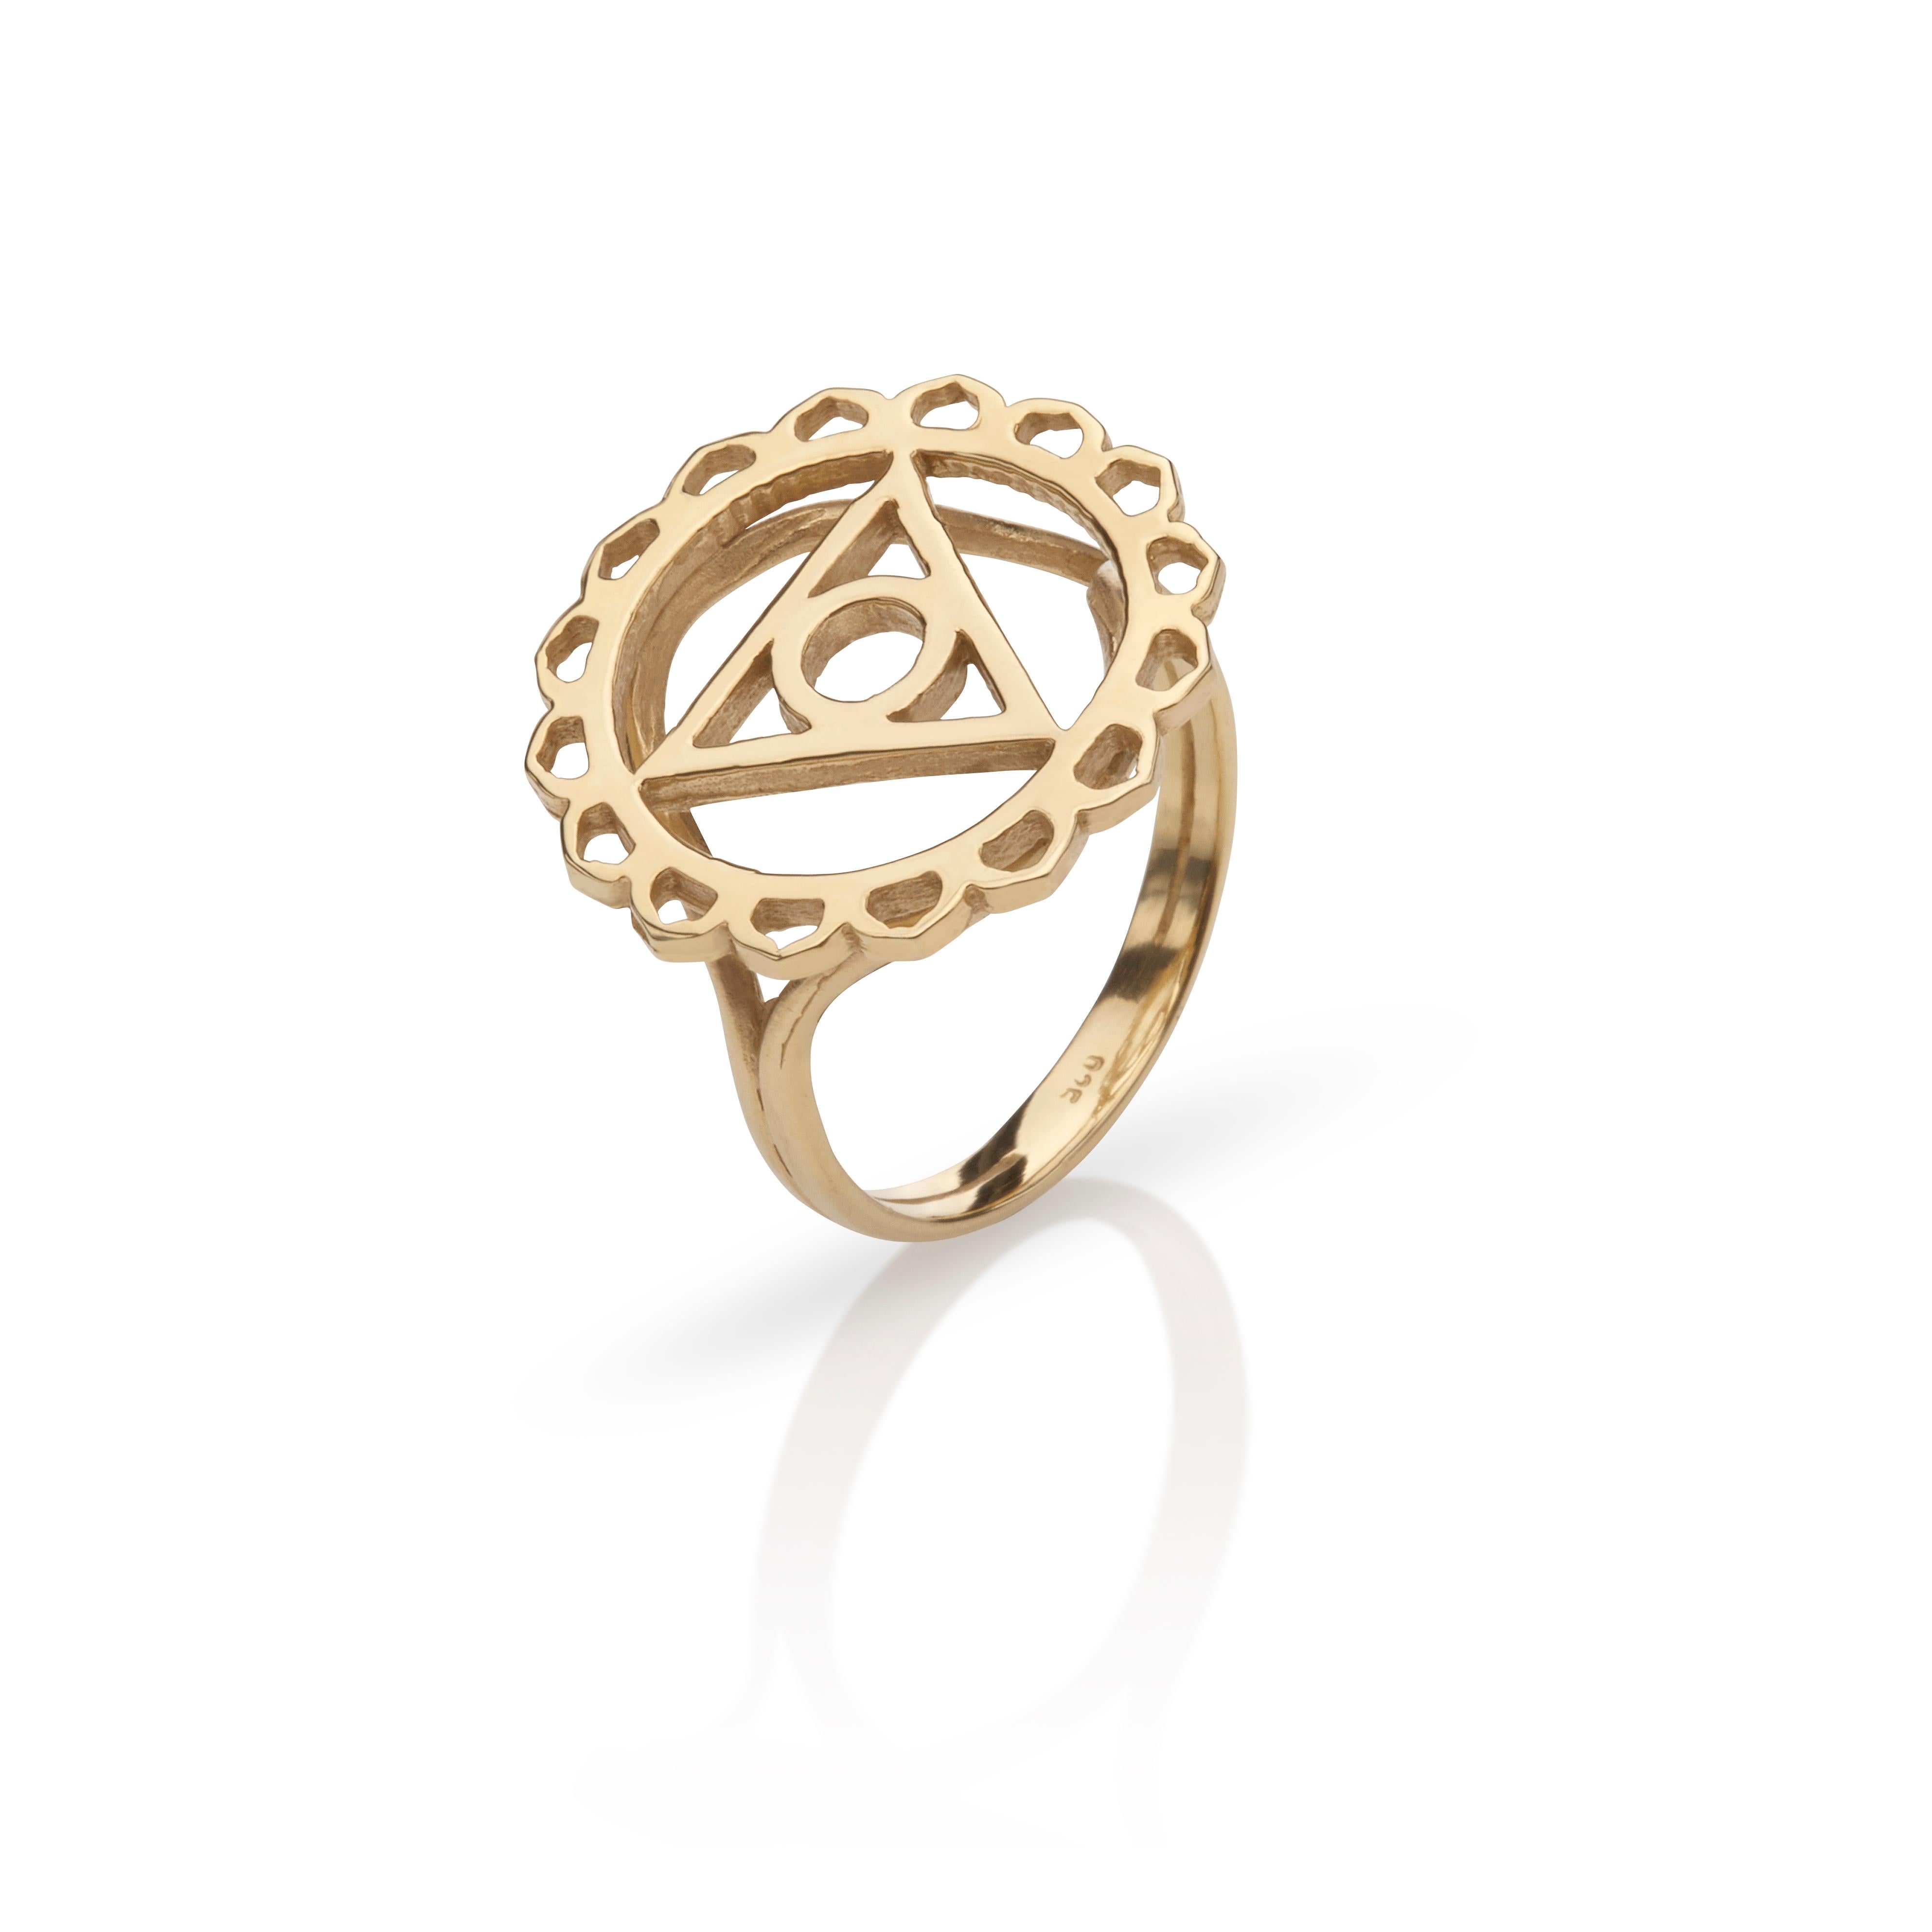 For Sale:  Handcrafted Yoga Ring with the Vissuddha Throat Chakra in 14Kt Gold 2